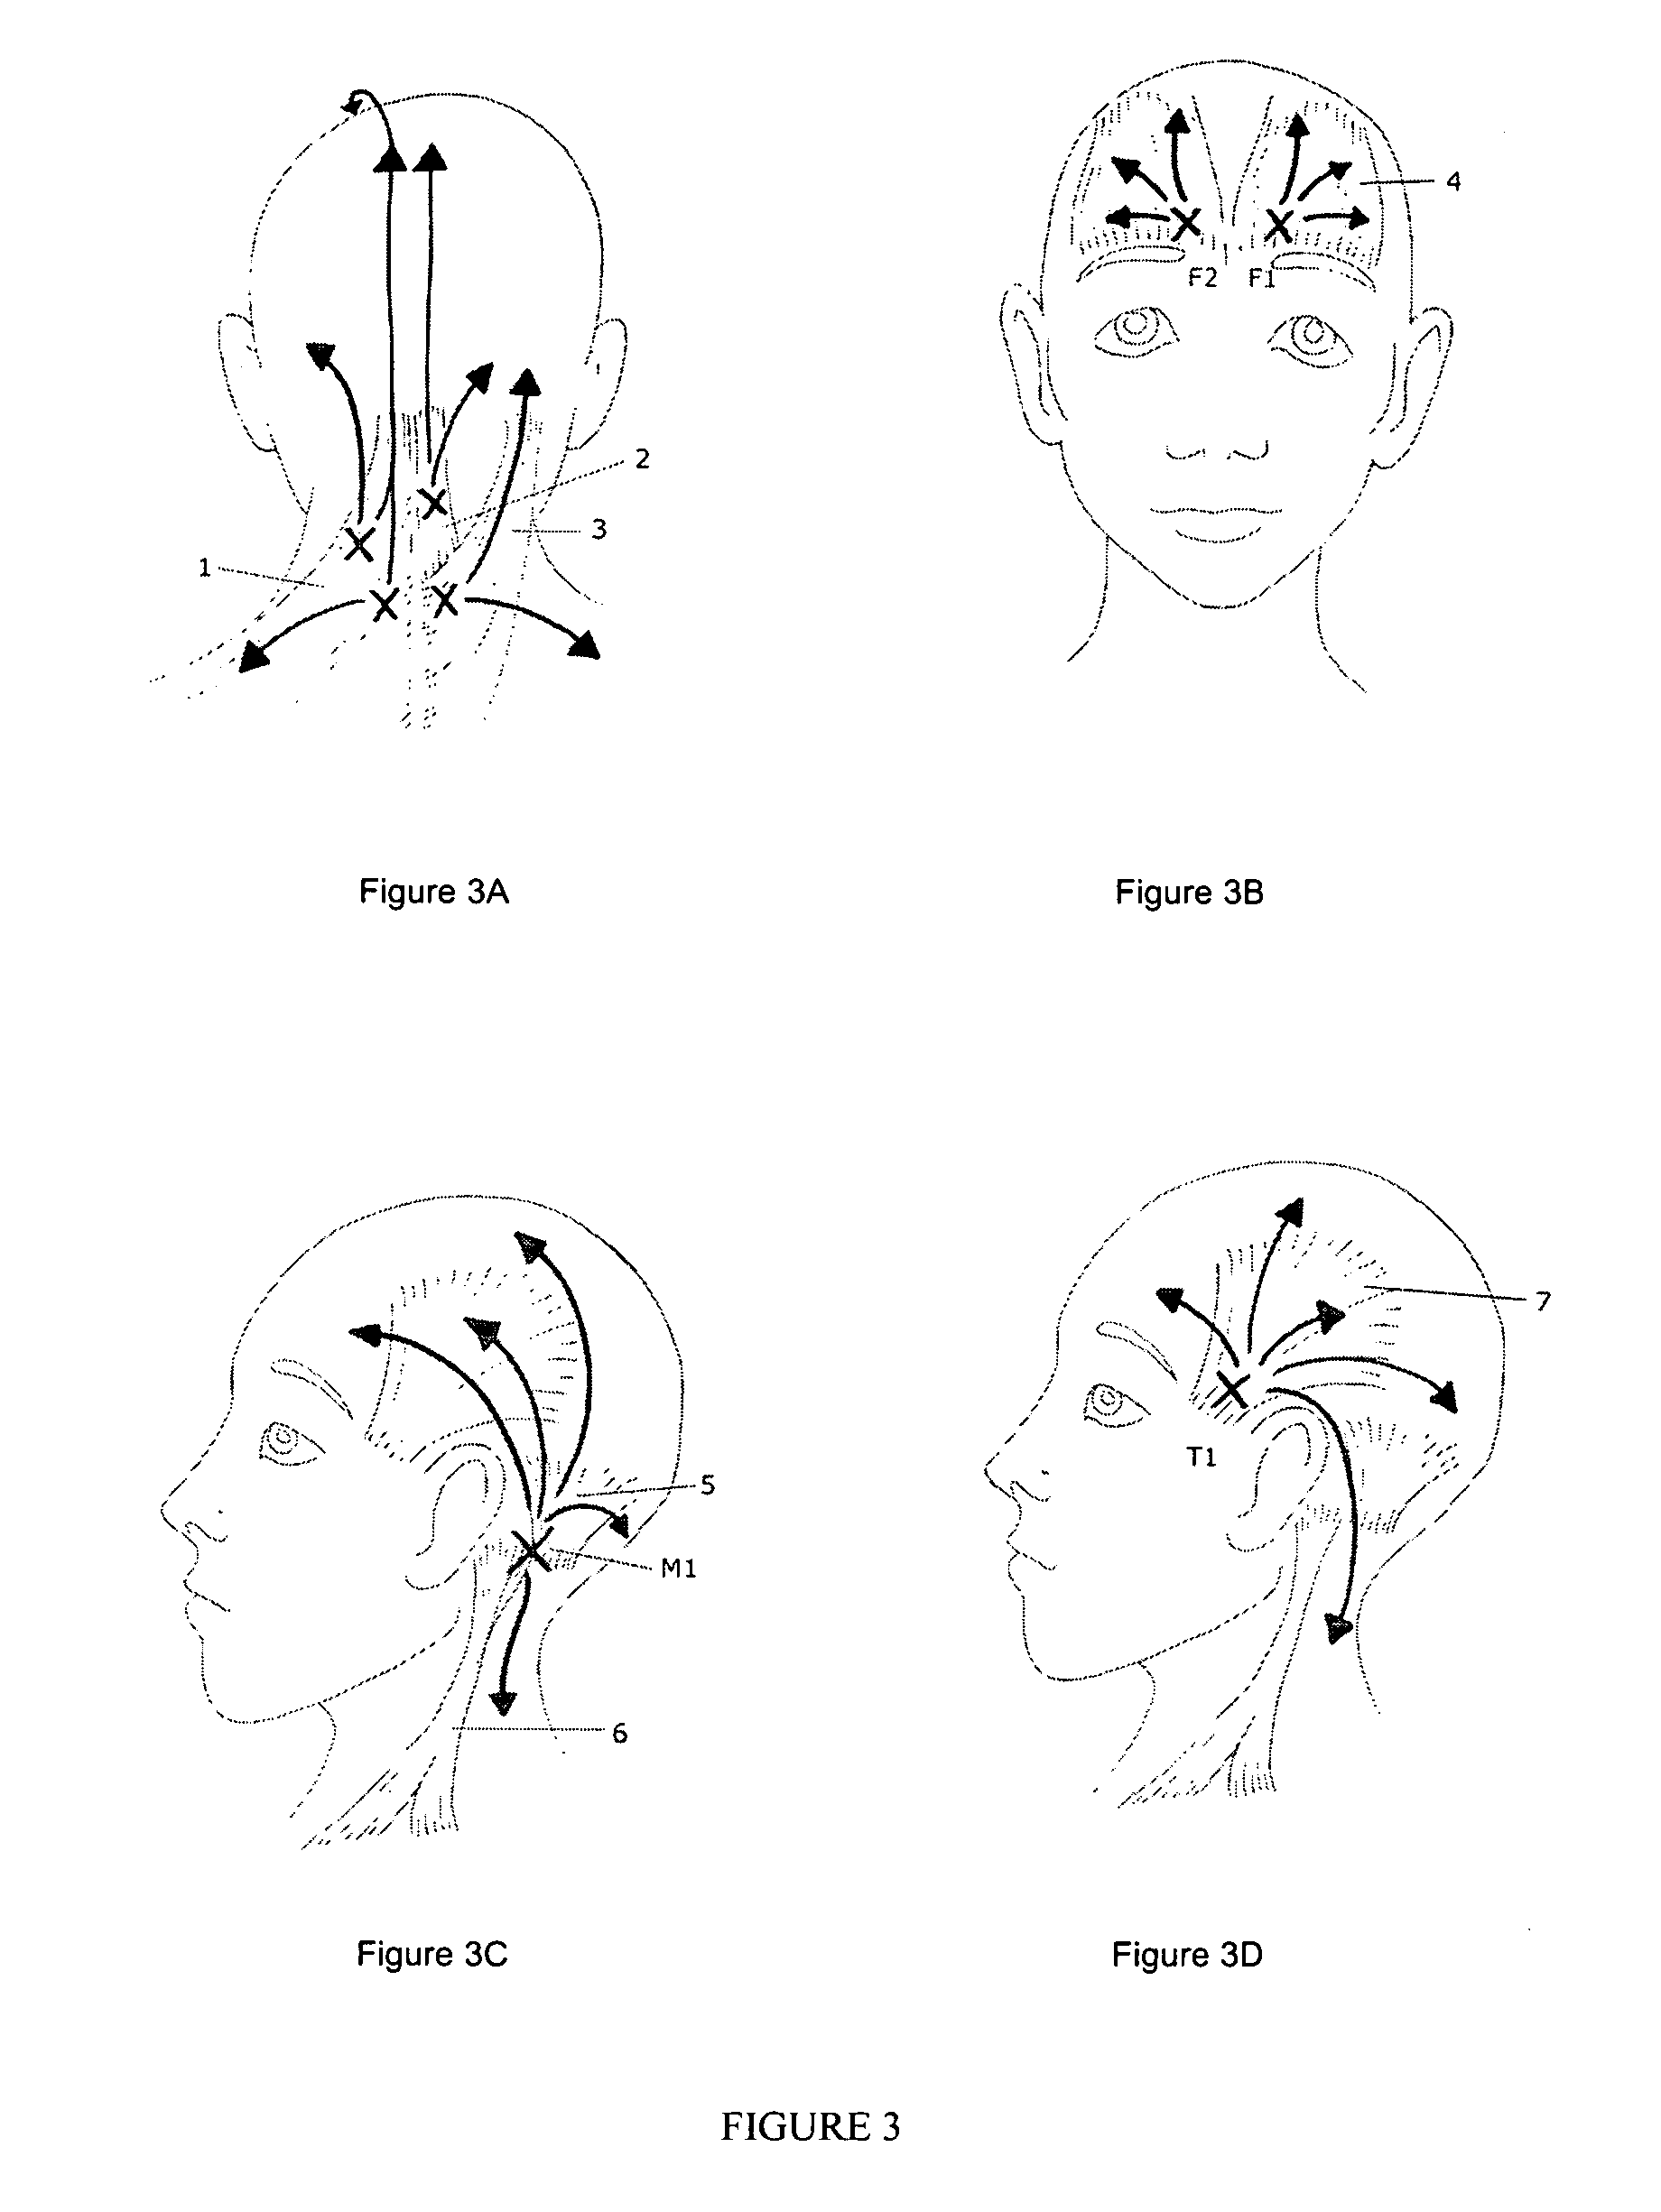 Method and product for headache relief